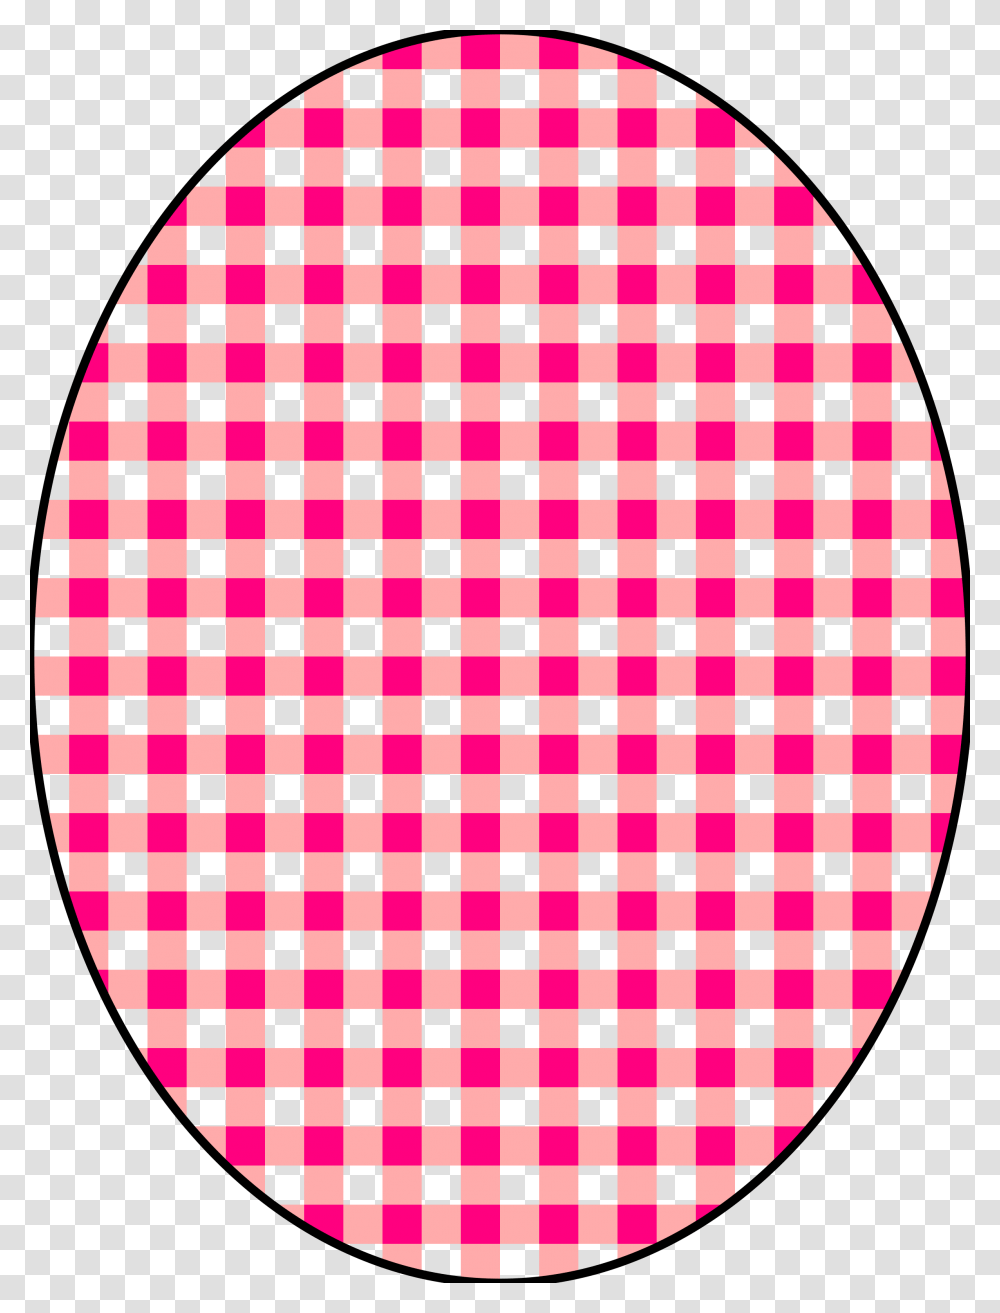 Pattern Checkered Vichy 03 Pink Clip Arts White Plaid Tree Skirt, Word, Sphere, Rug, Label Transparent Png